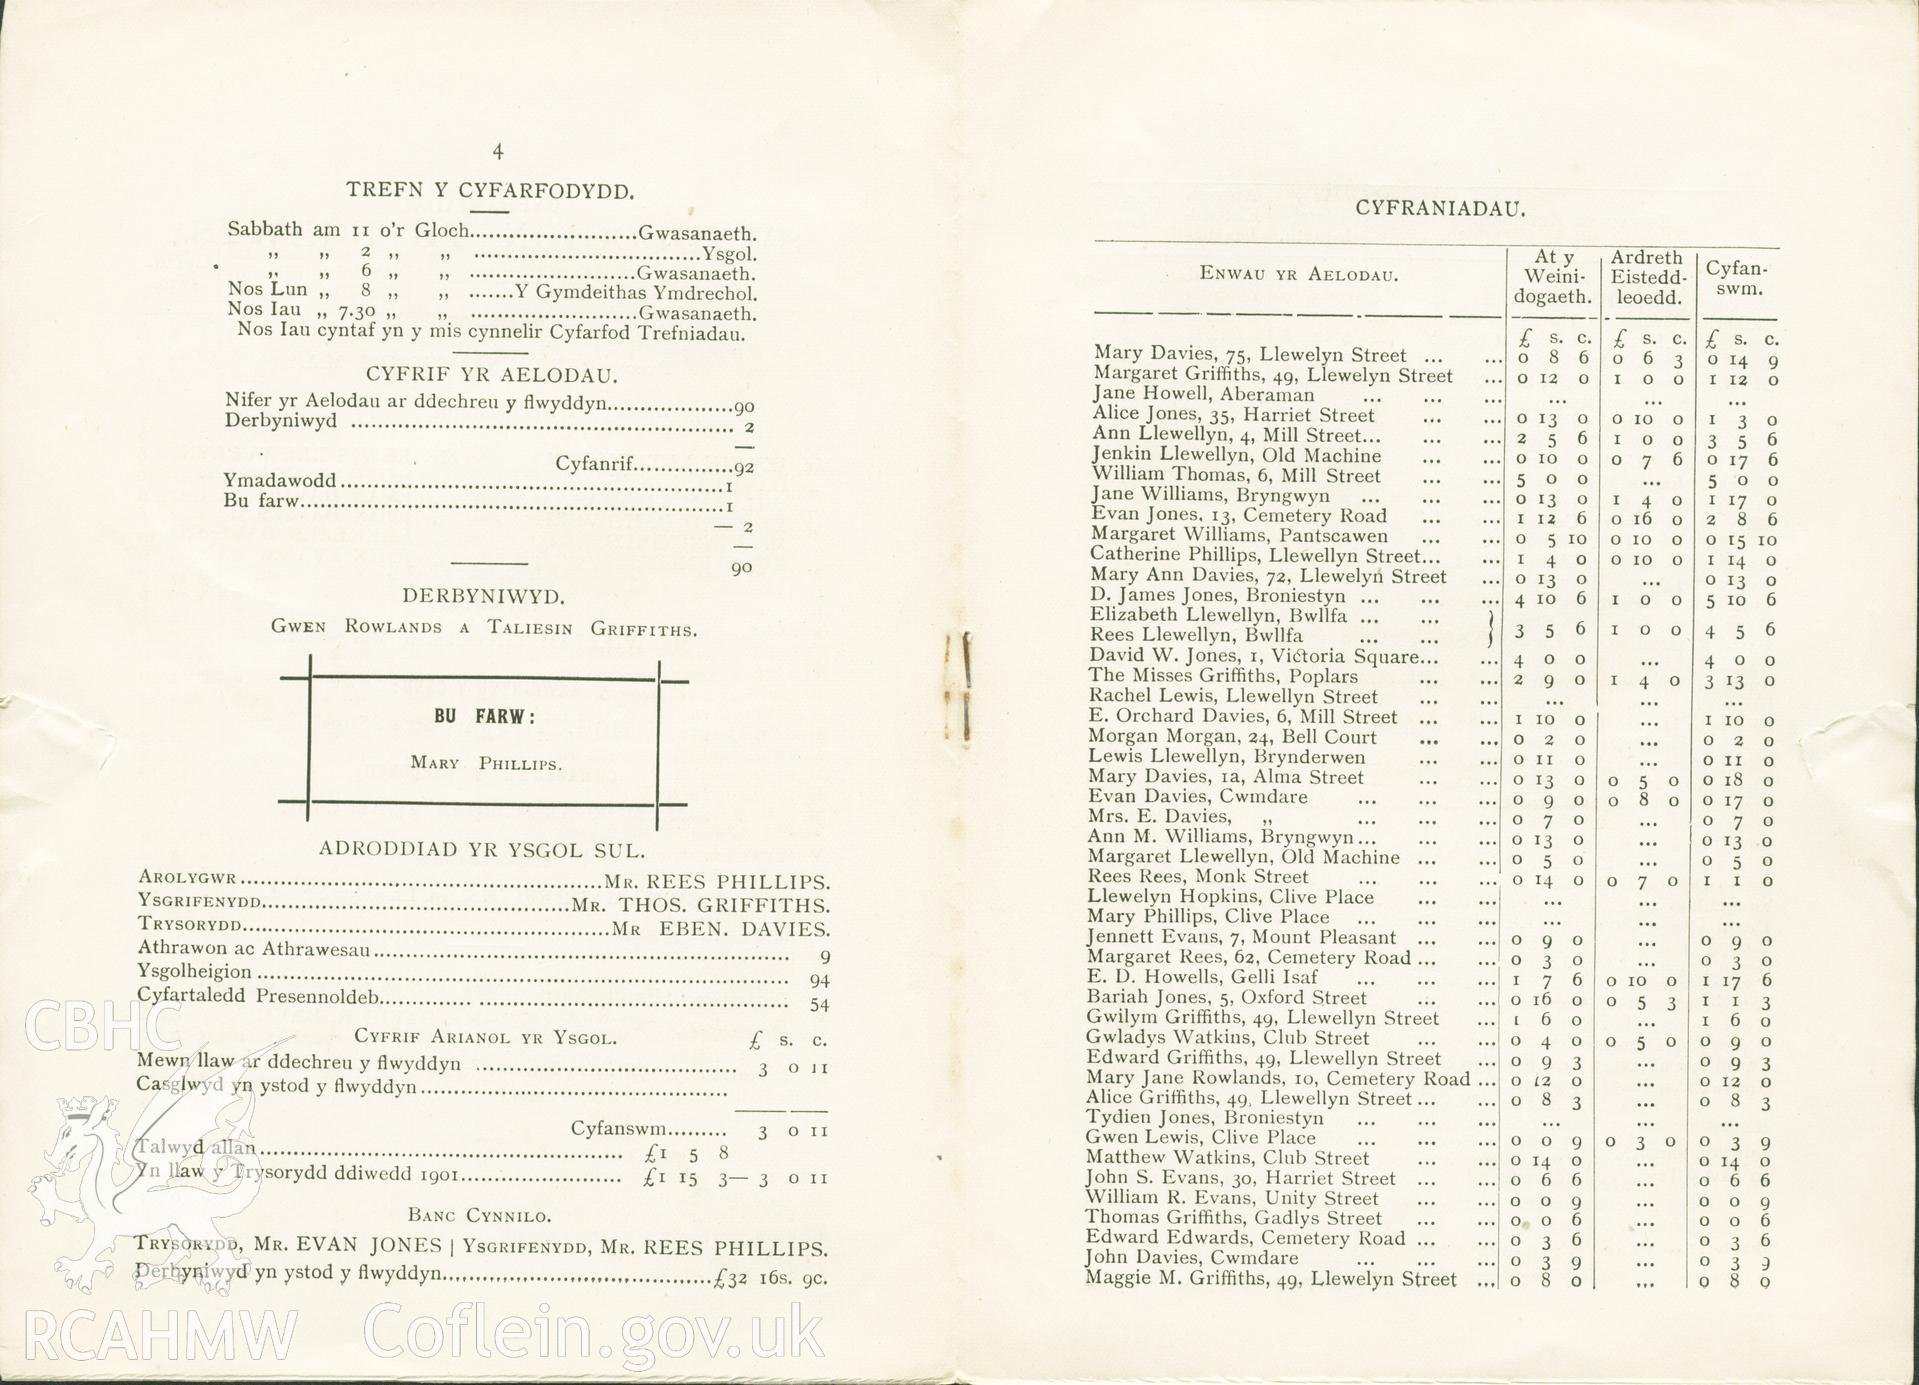 Hen-Dy-Cwrdd, Aberdar's end of year report for December, 1901, listing the times of meetings; number of members; financial details for the Sunday School and a list of people who contributed money towards the church. Donated to the RCAHMW during the Digital Dissent Project.